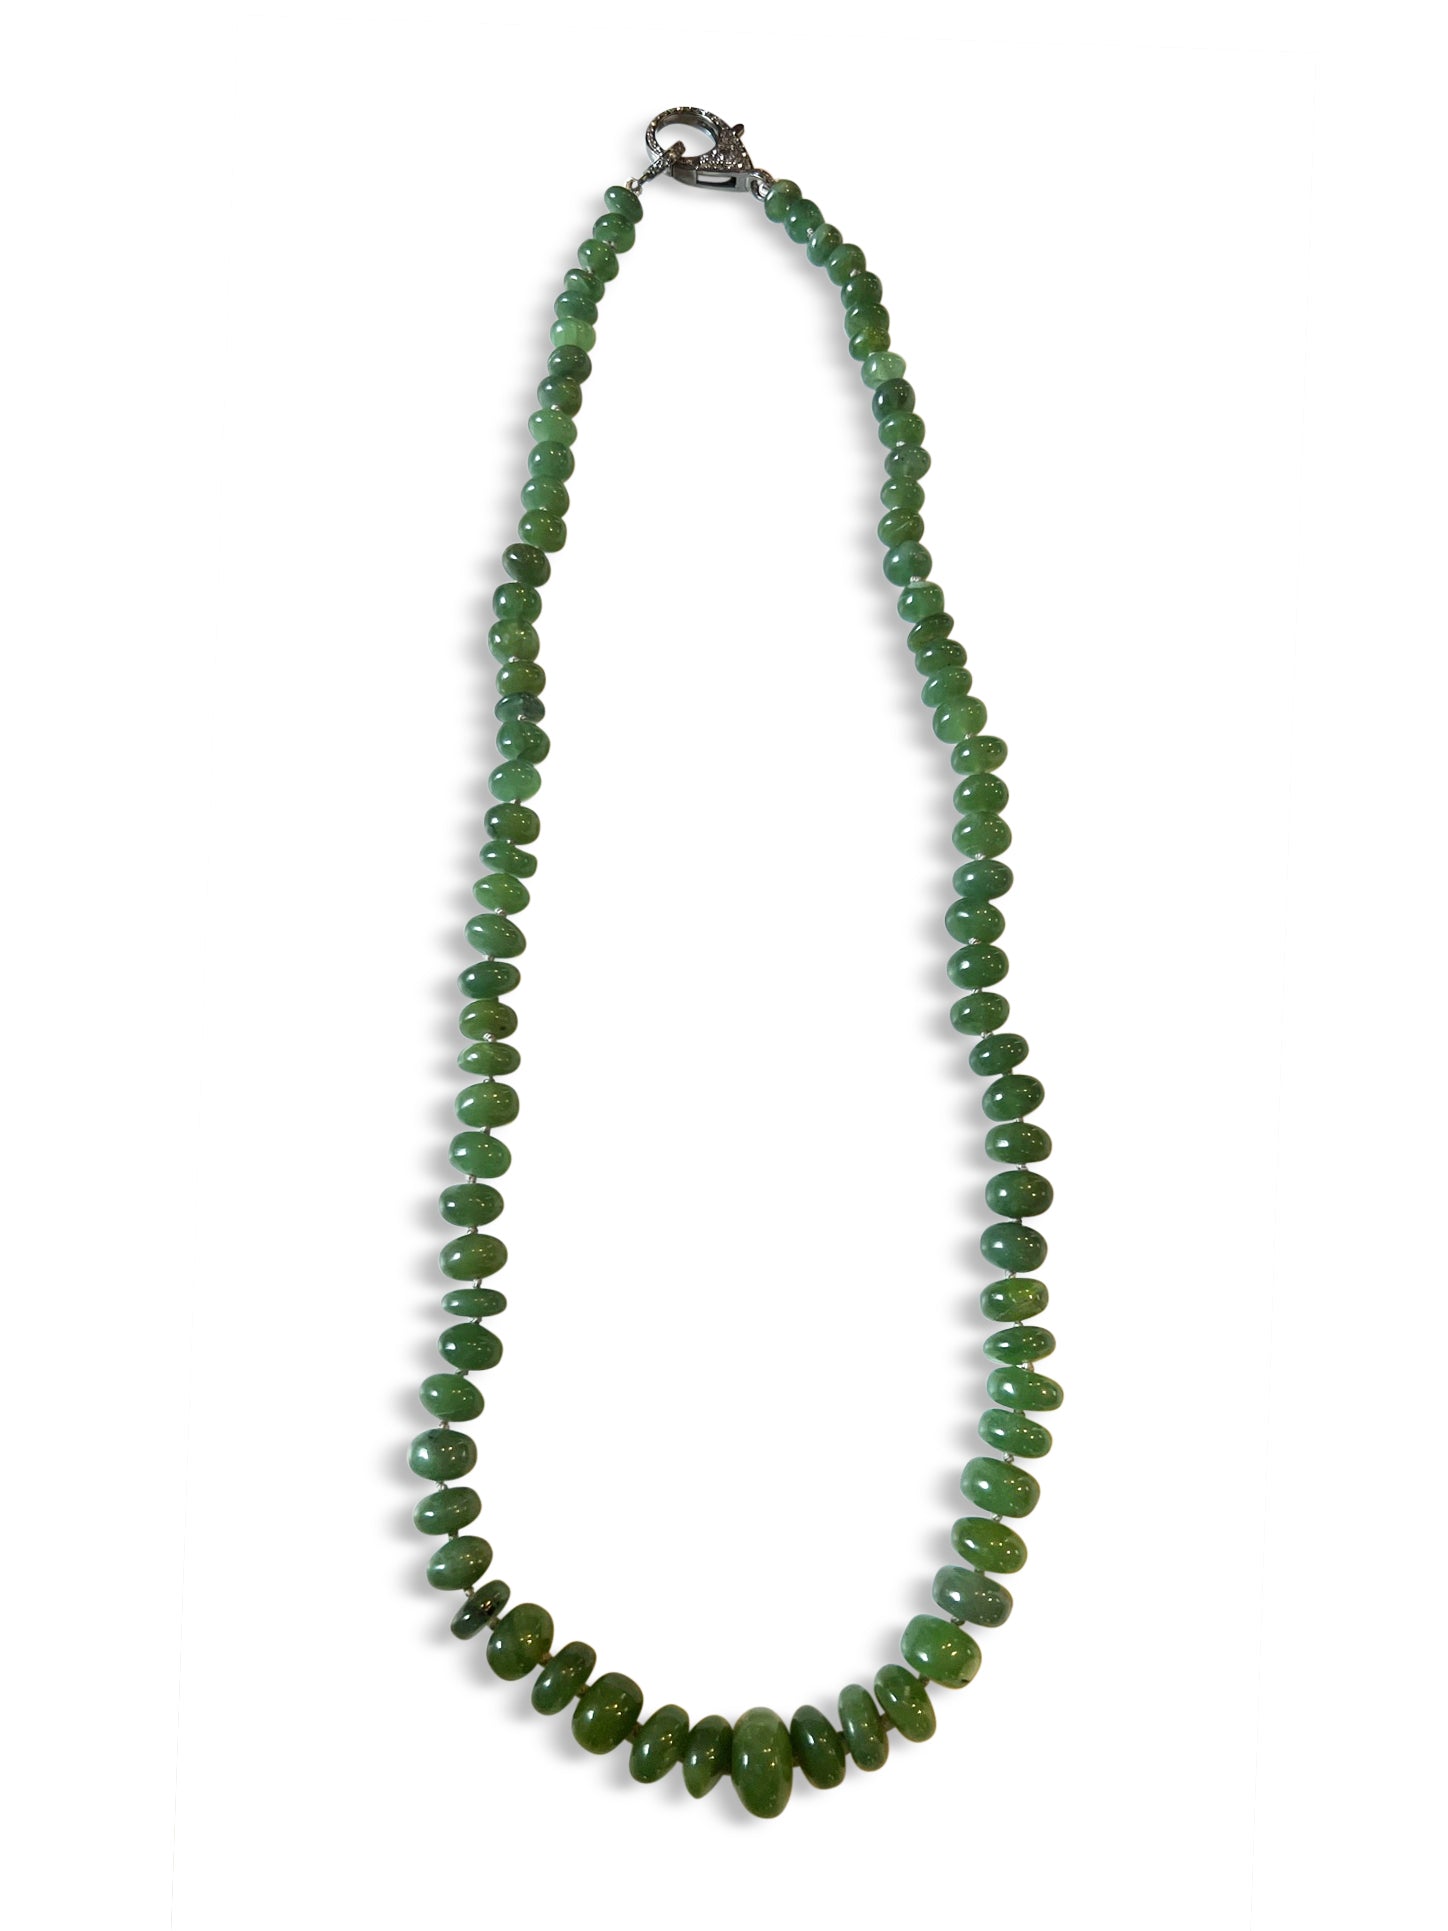 Olive Jade with Pave Diamond Clip set in Sterling Silver